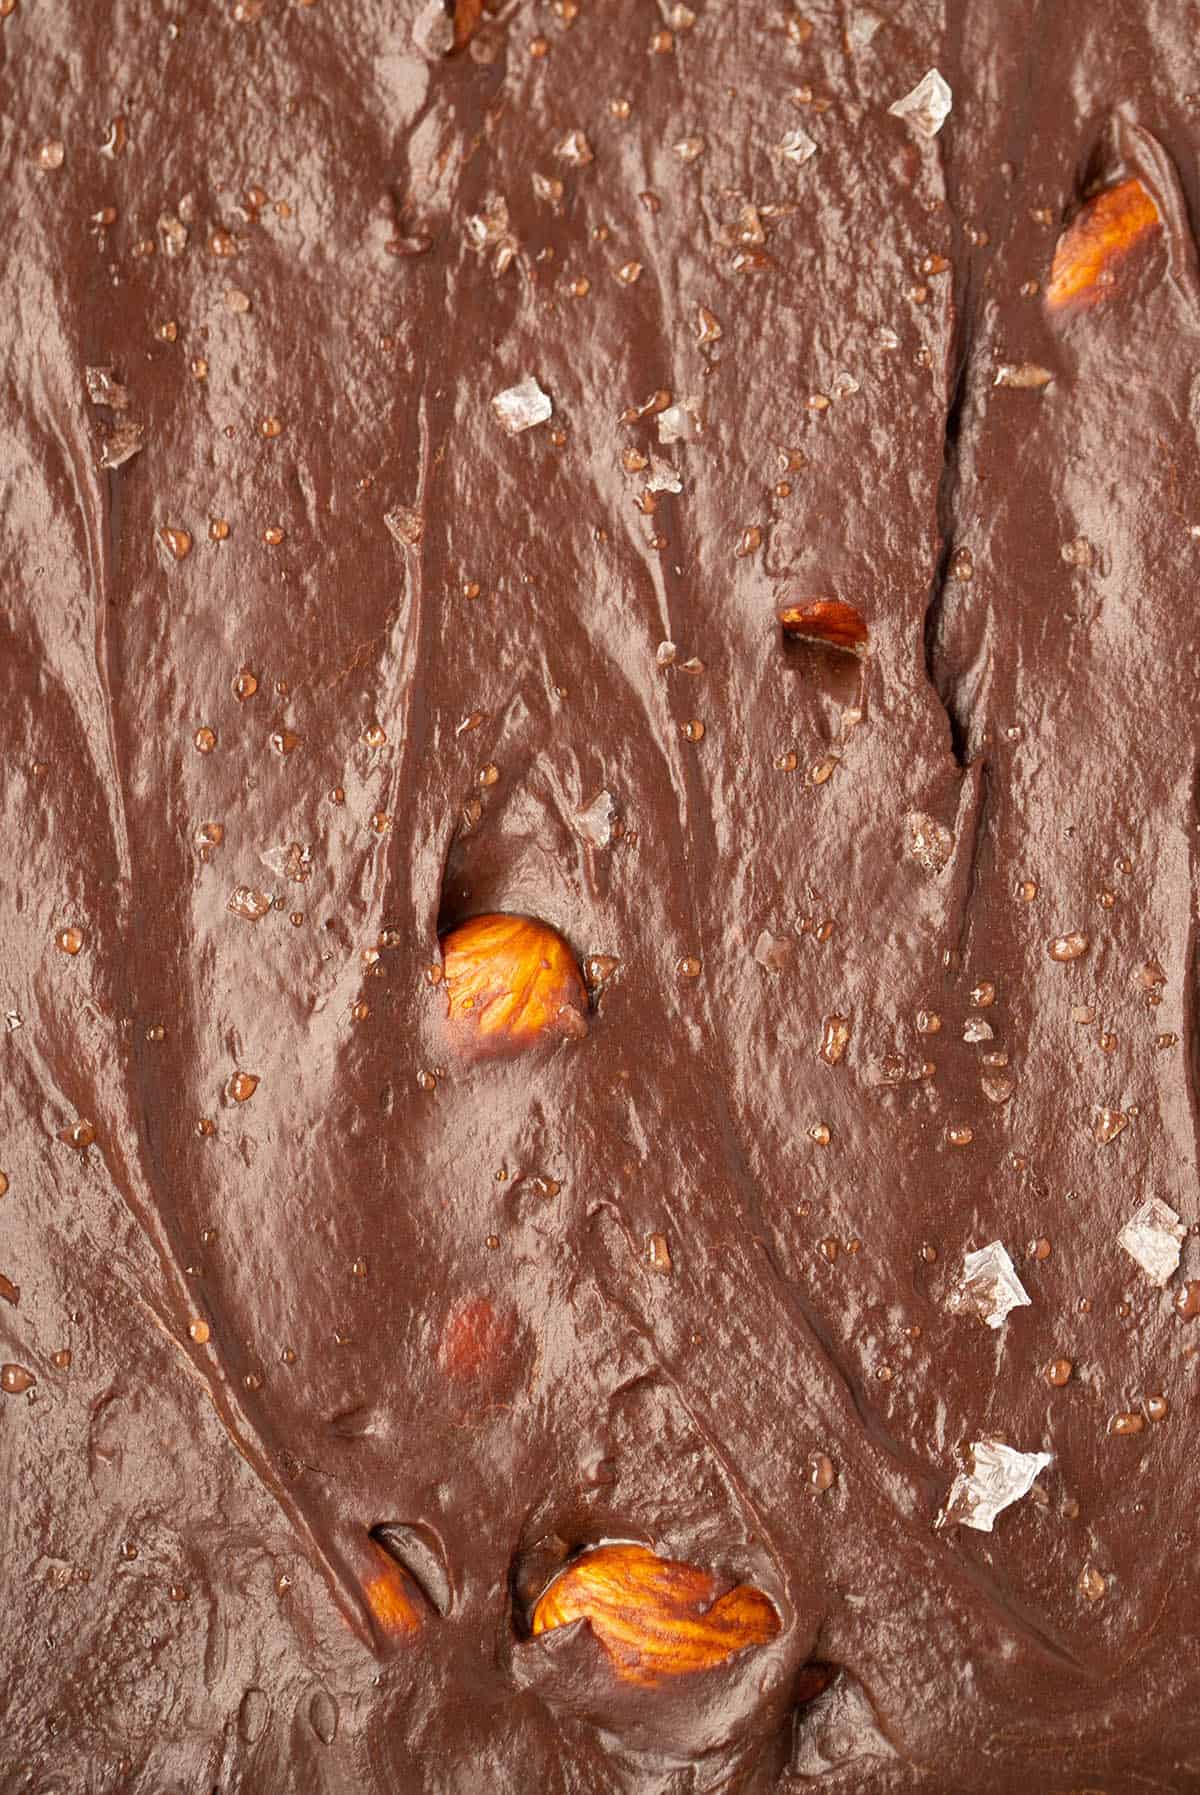 Close up of a gooey pan of chocolate fudge with almonds and sea salt in it.